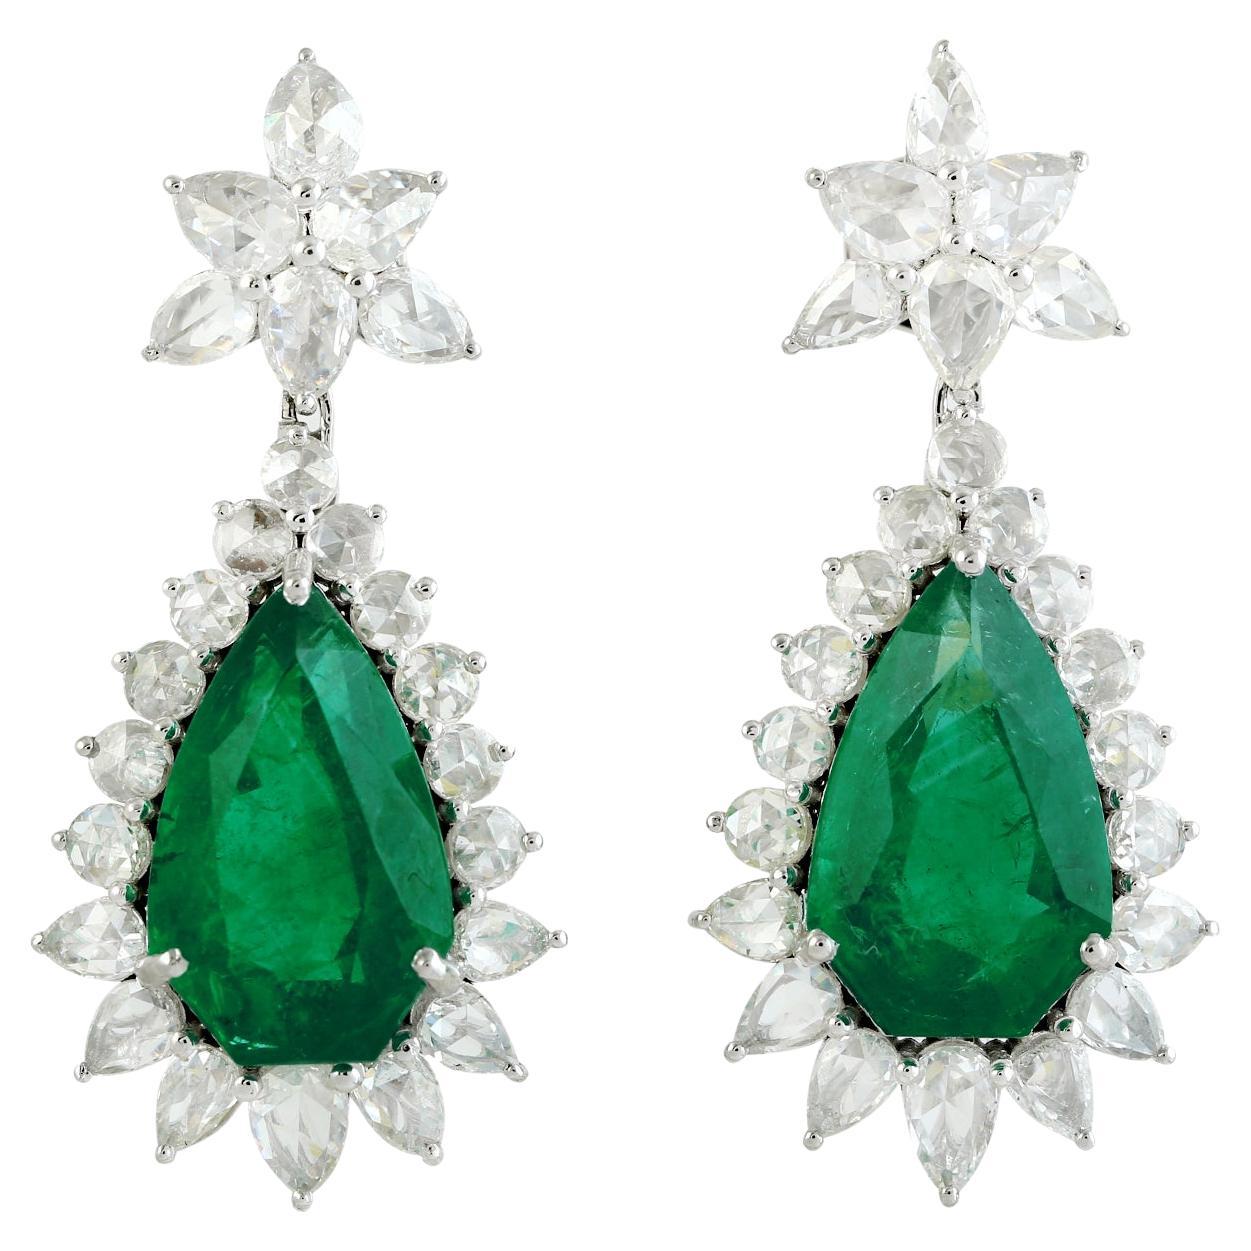 14.80ct Pear Shaped Emerald Dangle Earrings With Diamonds Made In 18k Gold For Sale